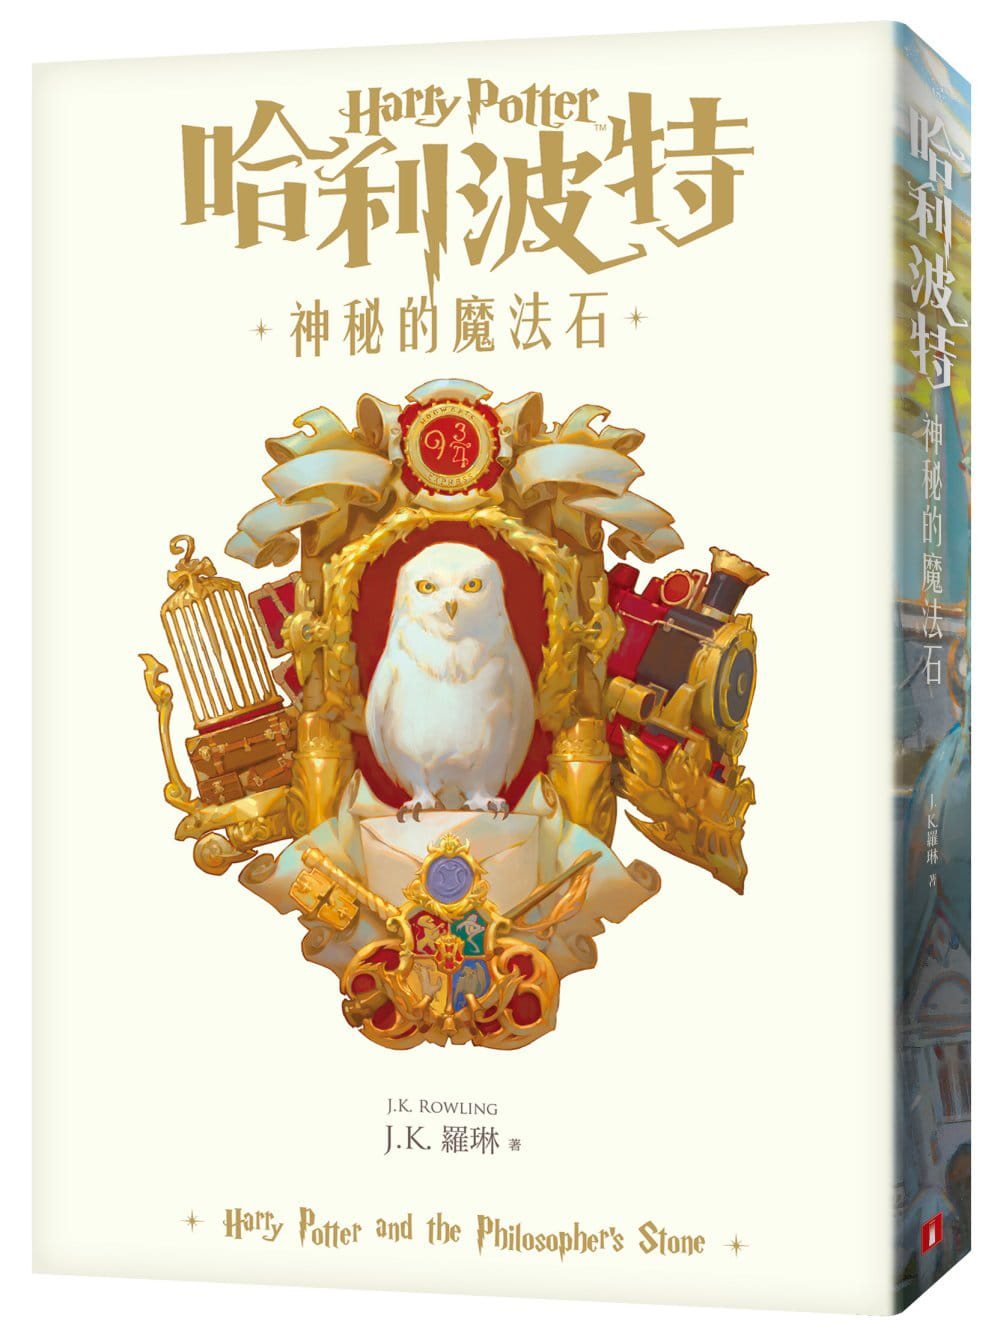 ‘Philosopher’s Stone’ Traditional Chinese 20th anniversary edition